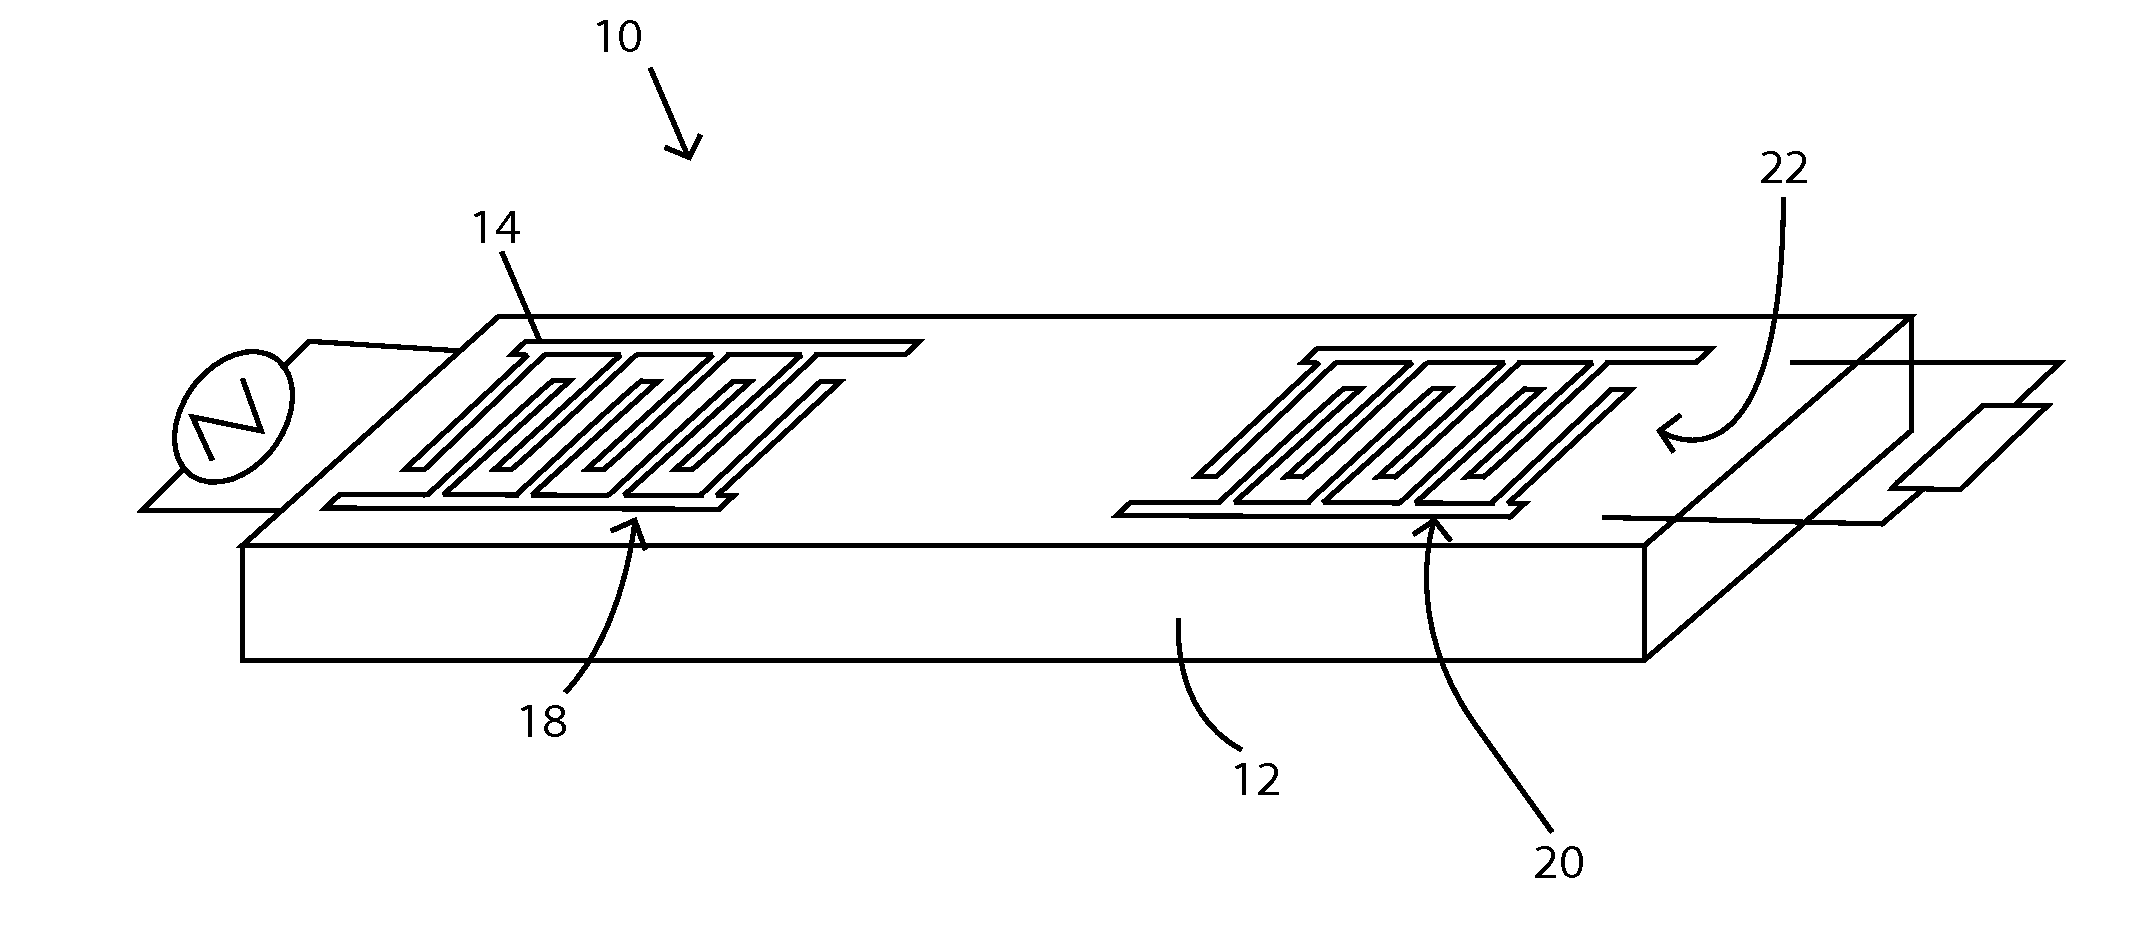 Device and method for measuring physical parameters using saw sensors